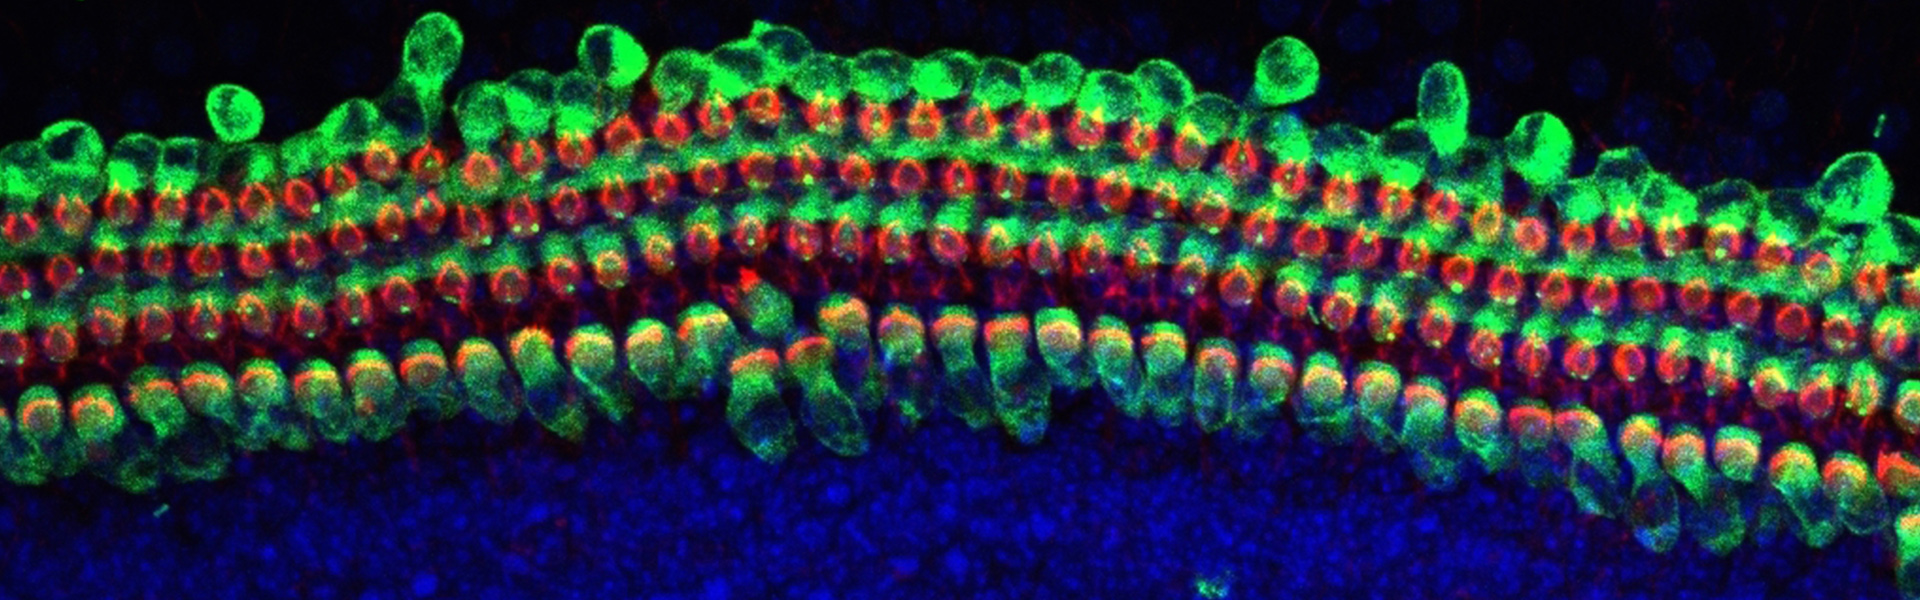 Rows of Sensory Hair Cells in Mouse Cochlear Culture